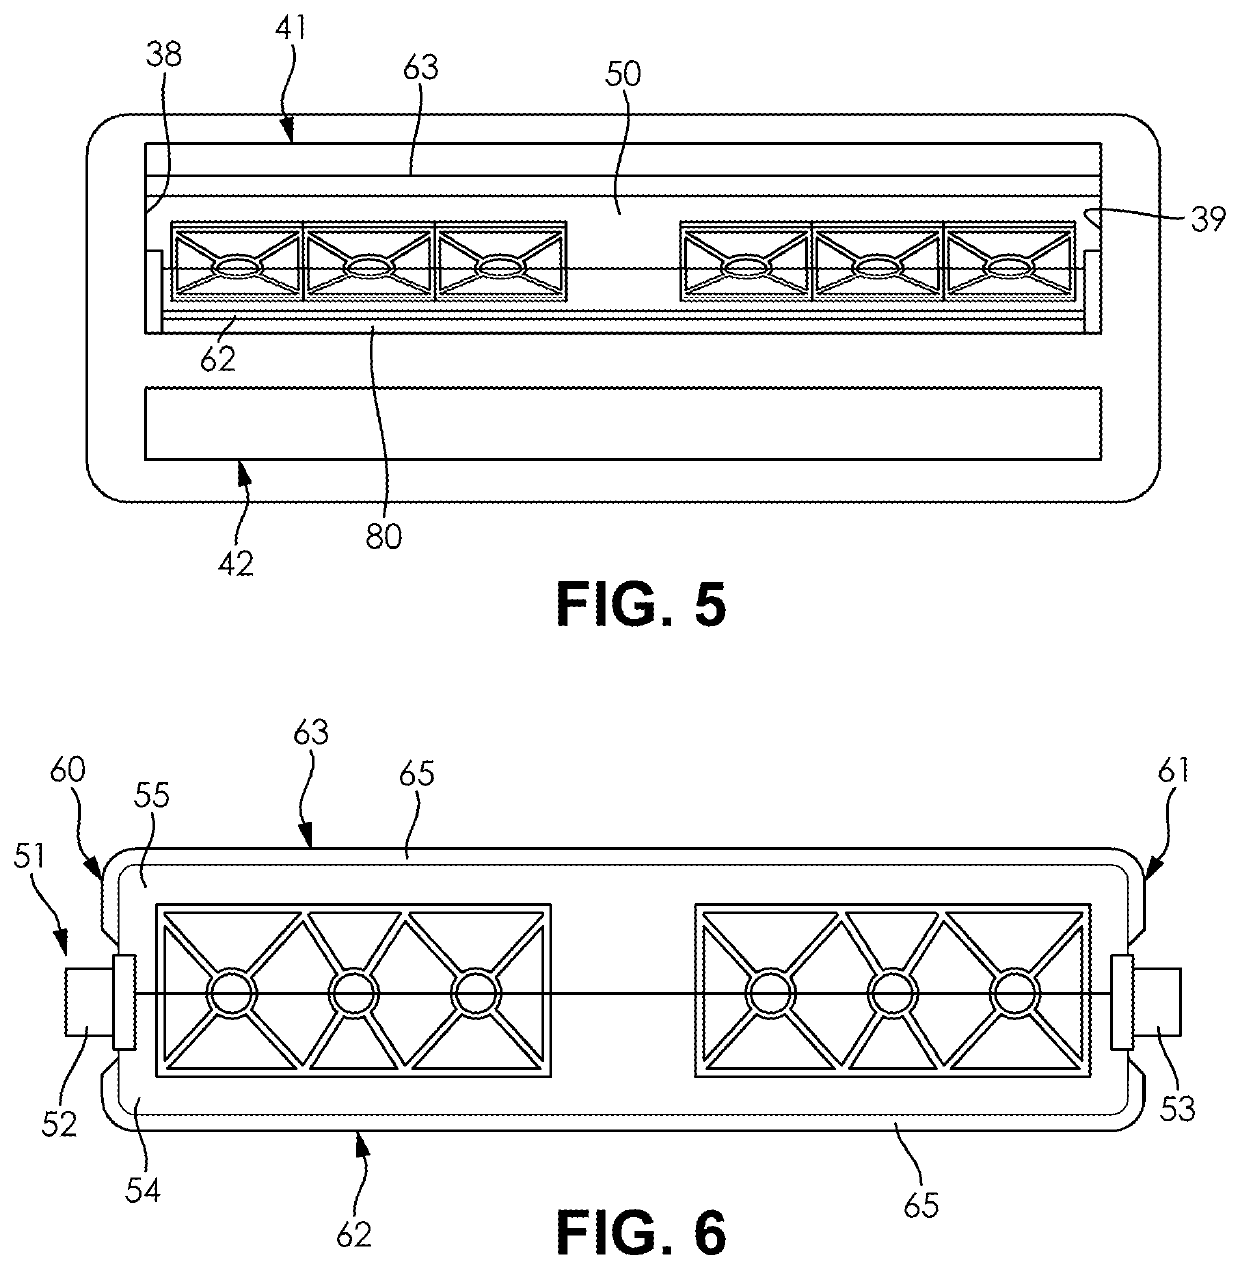 Method of distributing air ventilation in a vehicle